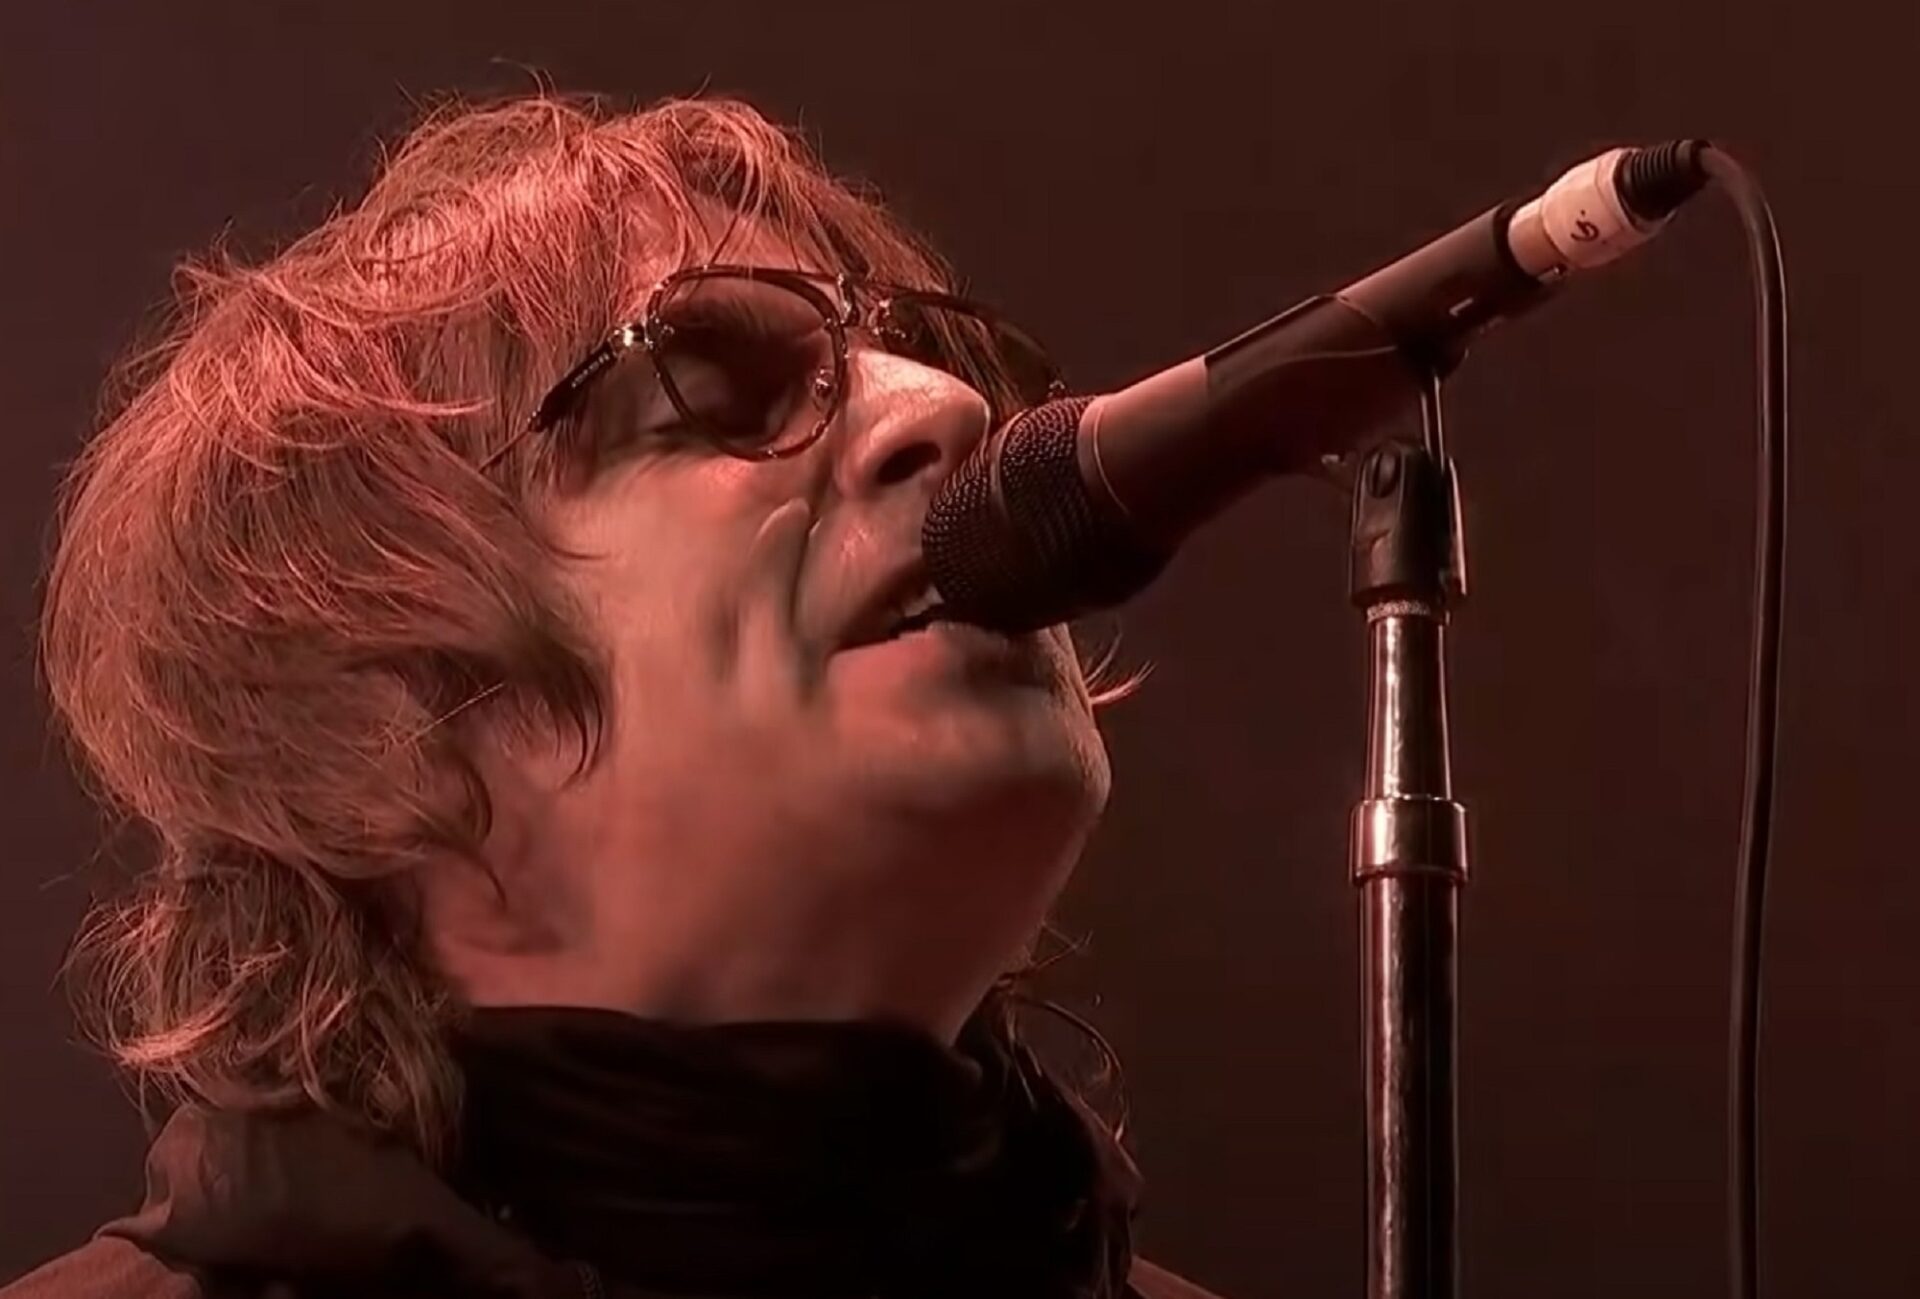 Liam Gallagher debuts new song ‘The World's In Need’ at intimate gig